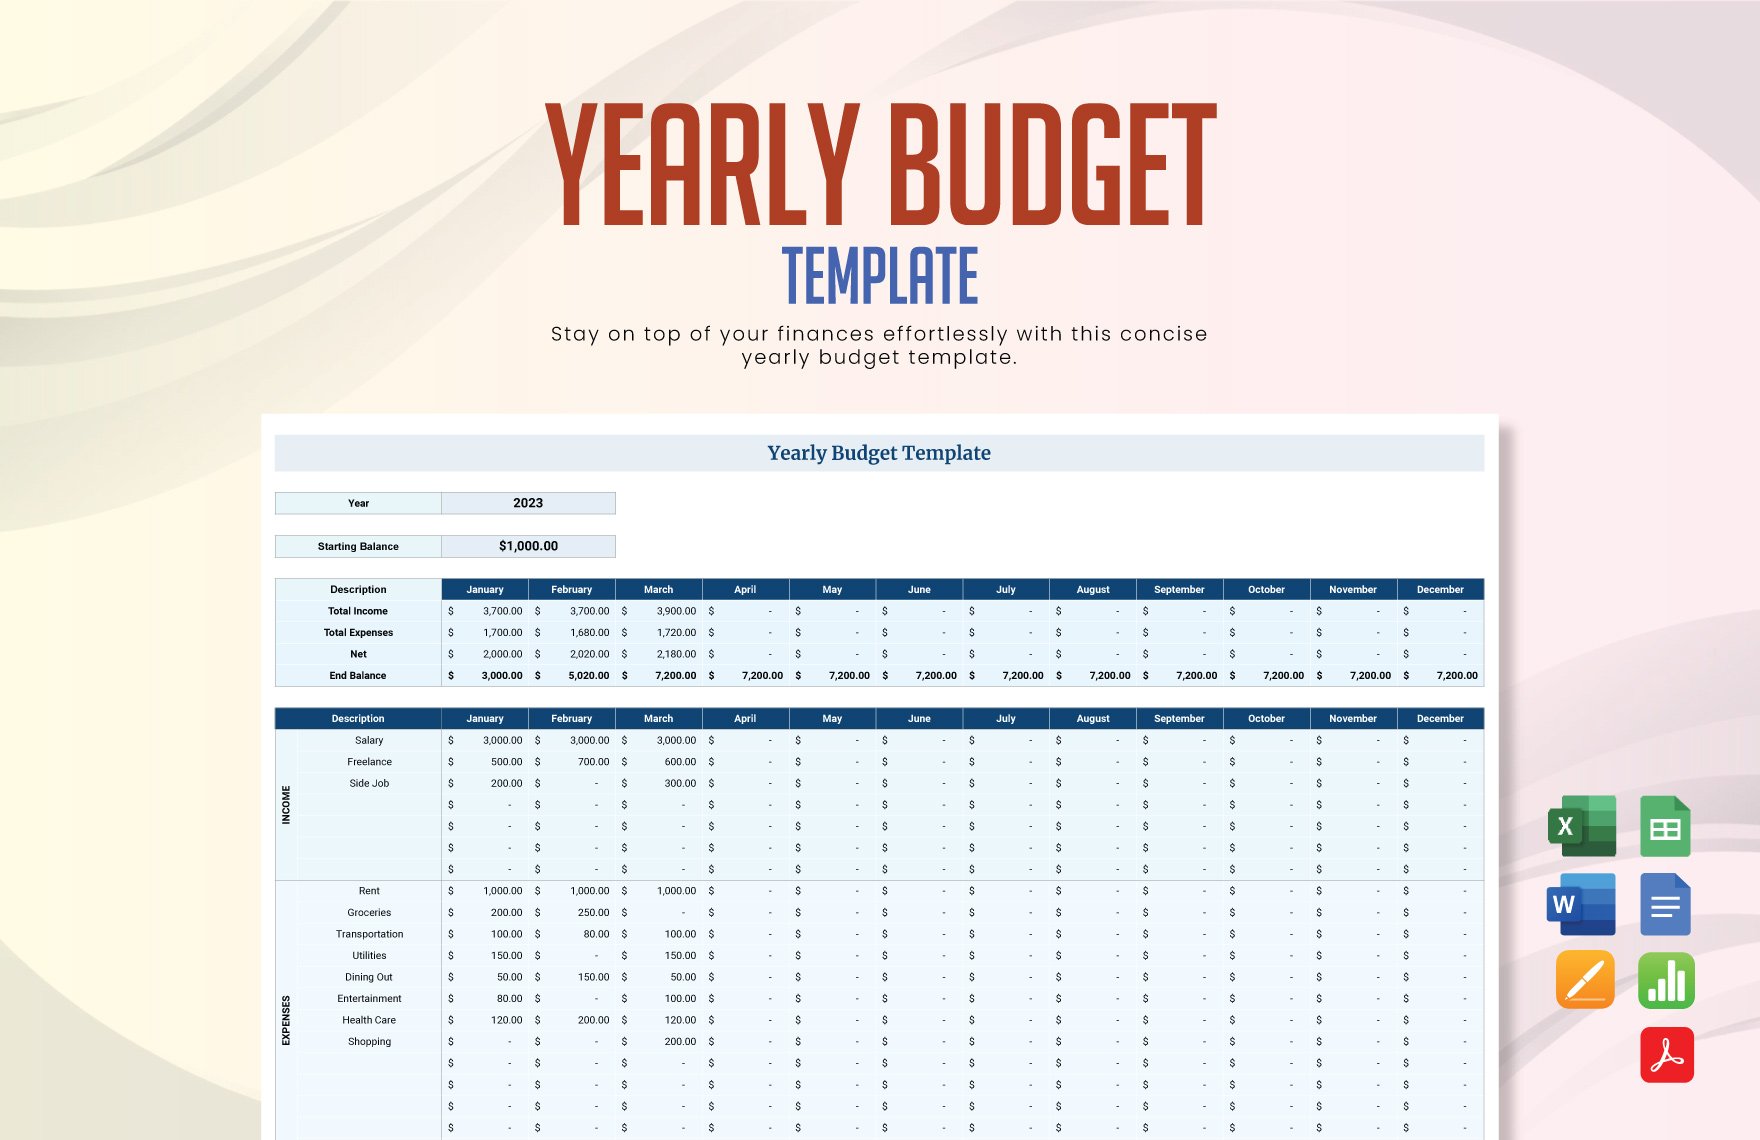 Yearly Budget Template in Excel, Google Sheets